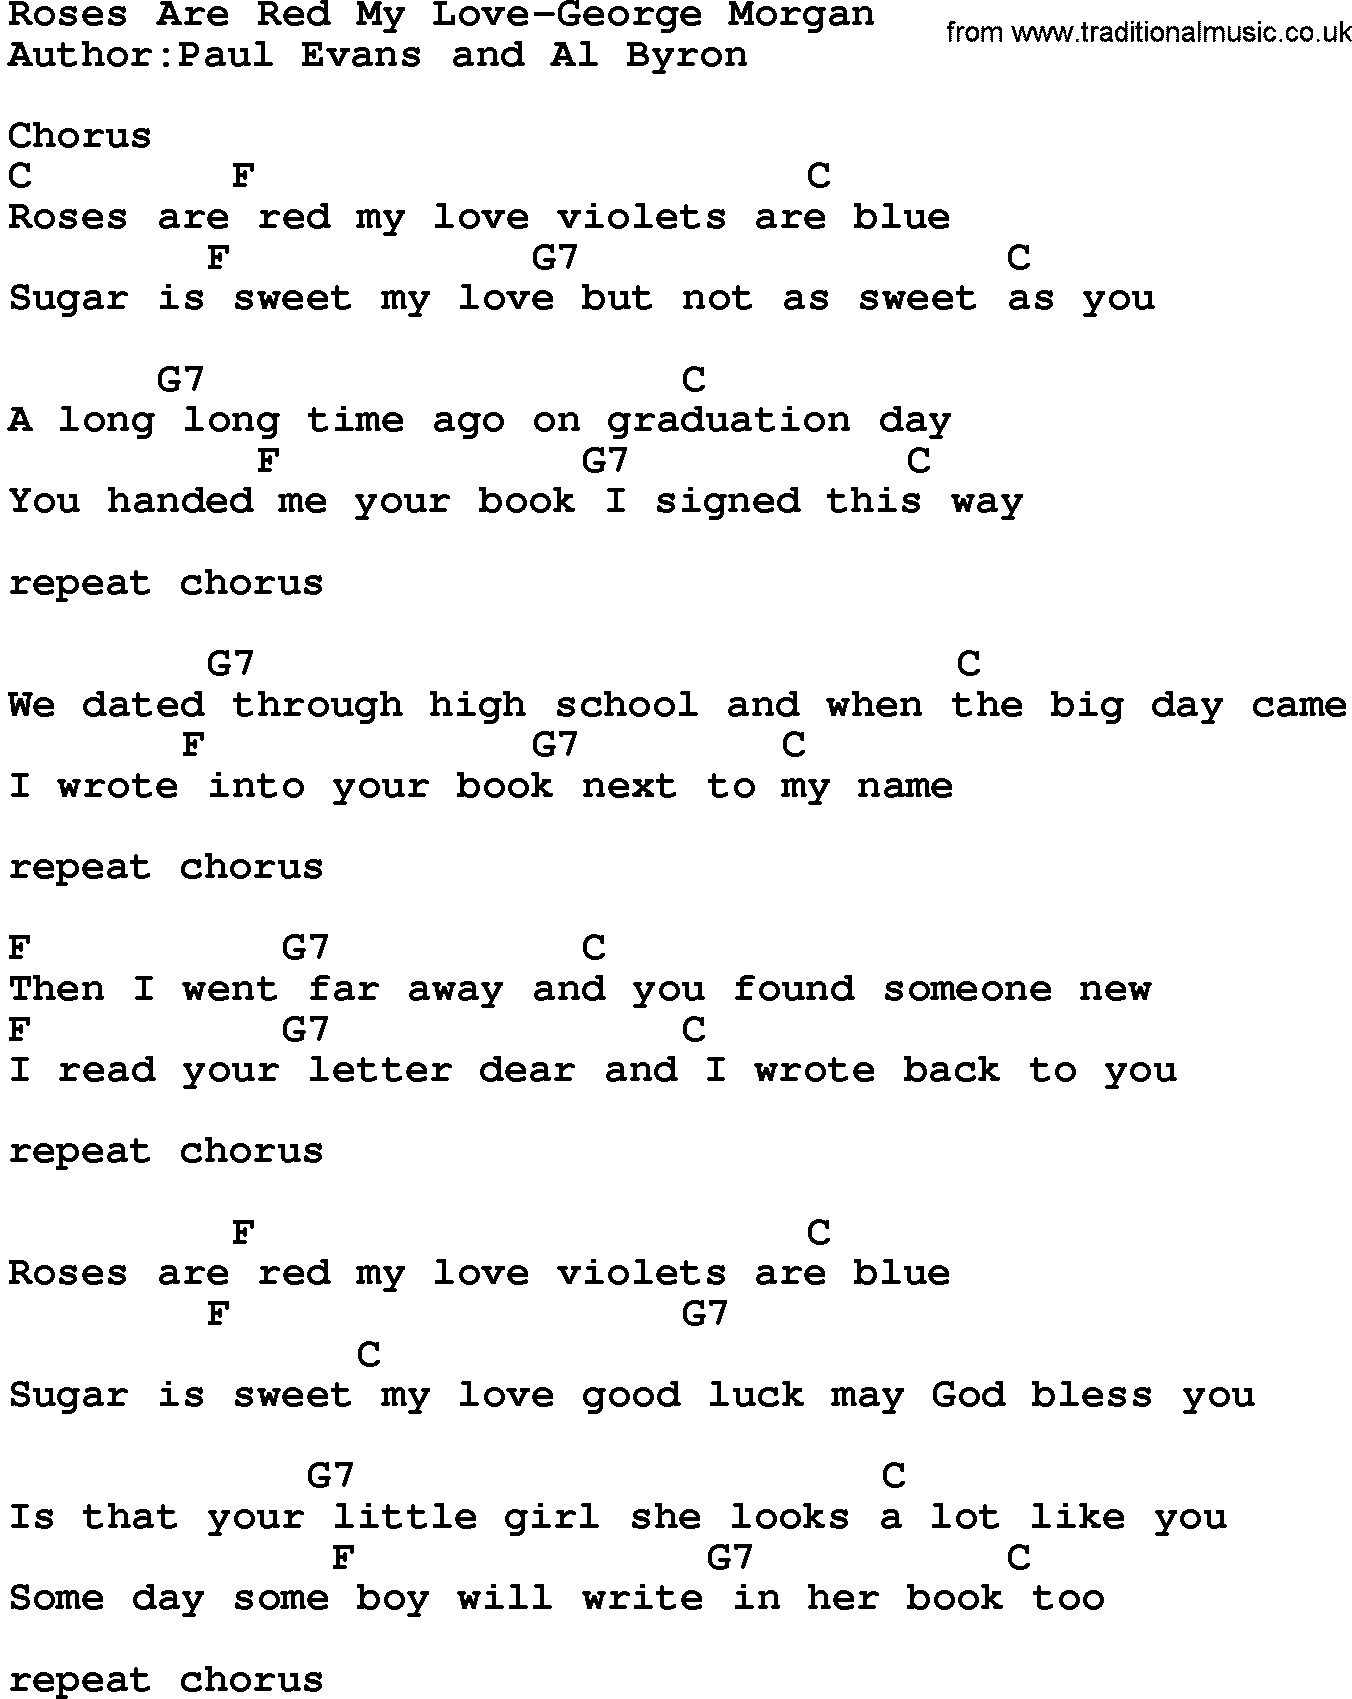 Country music song: Roses Are Red My Love-George Morgan lyrics and chords